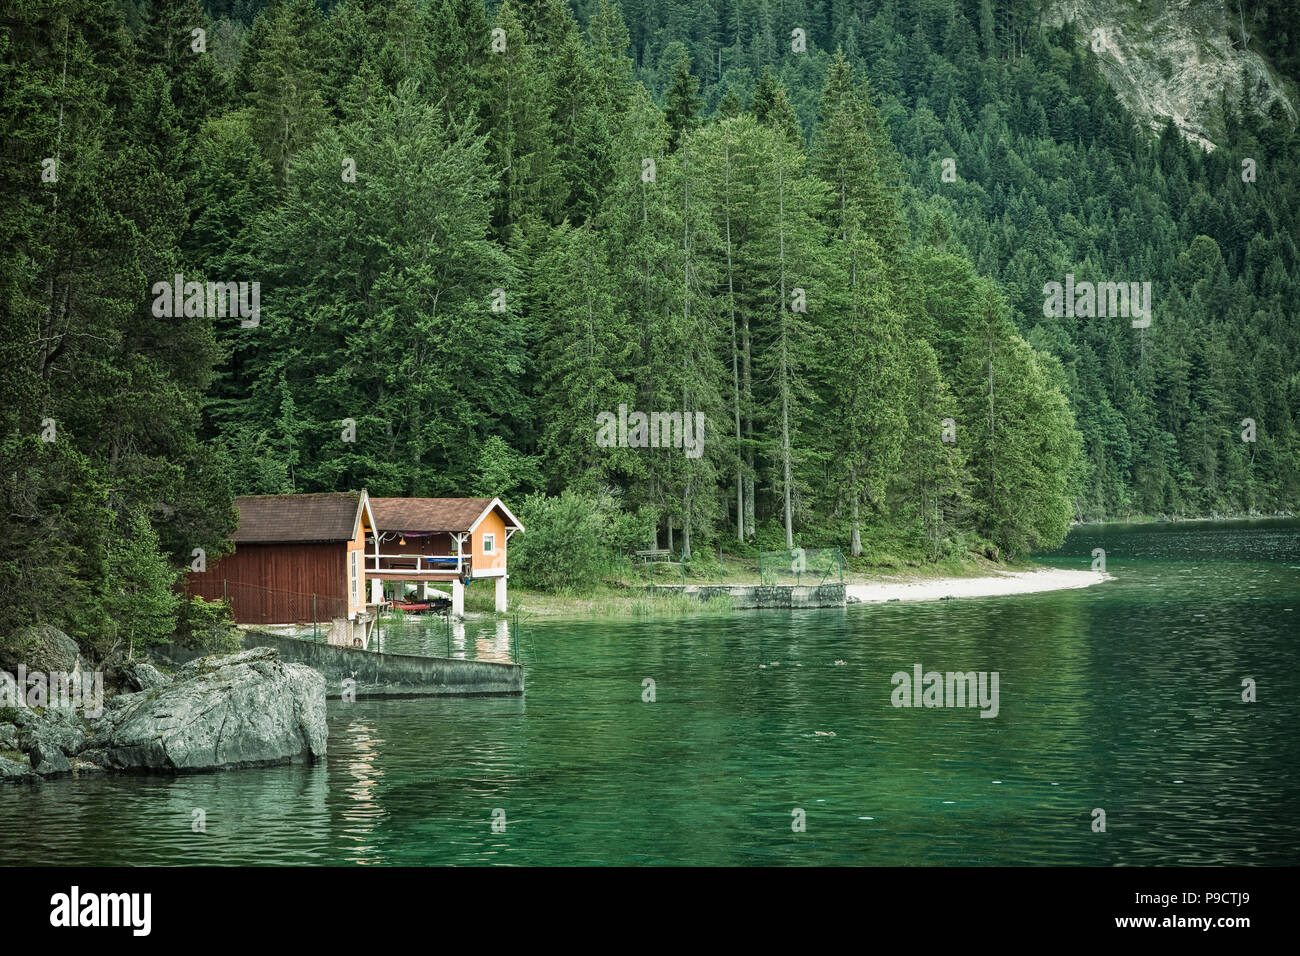 Small lakeside chalet huts at the side of Lake Eibsee in the Bavarian Alps, Bavaria, Germany Stock Photo